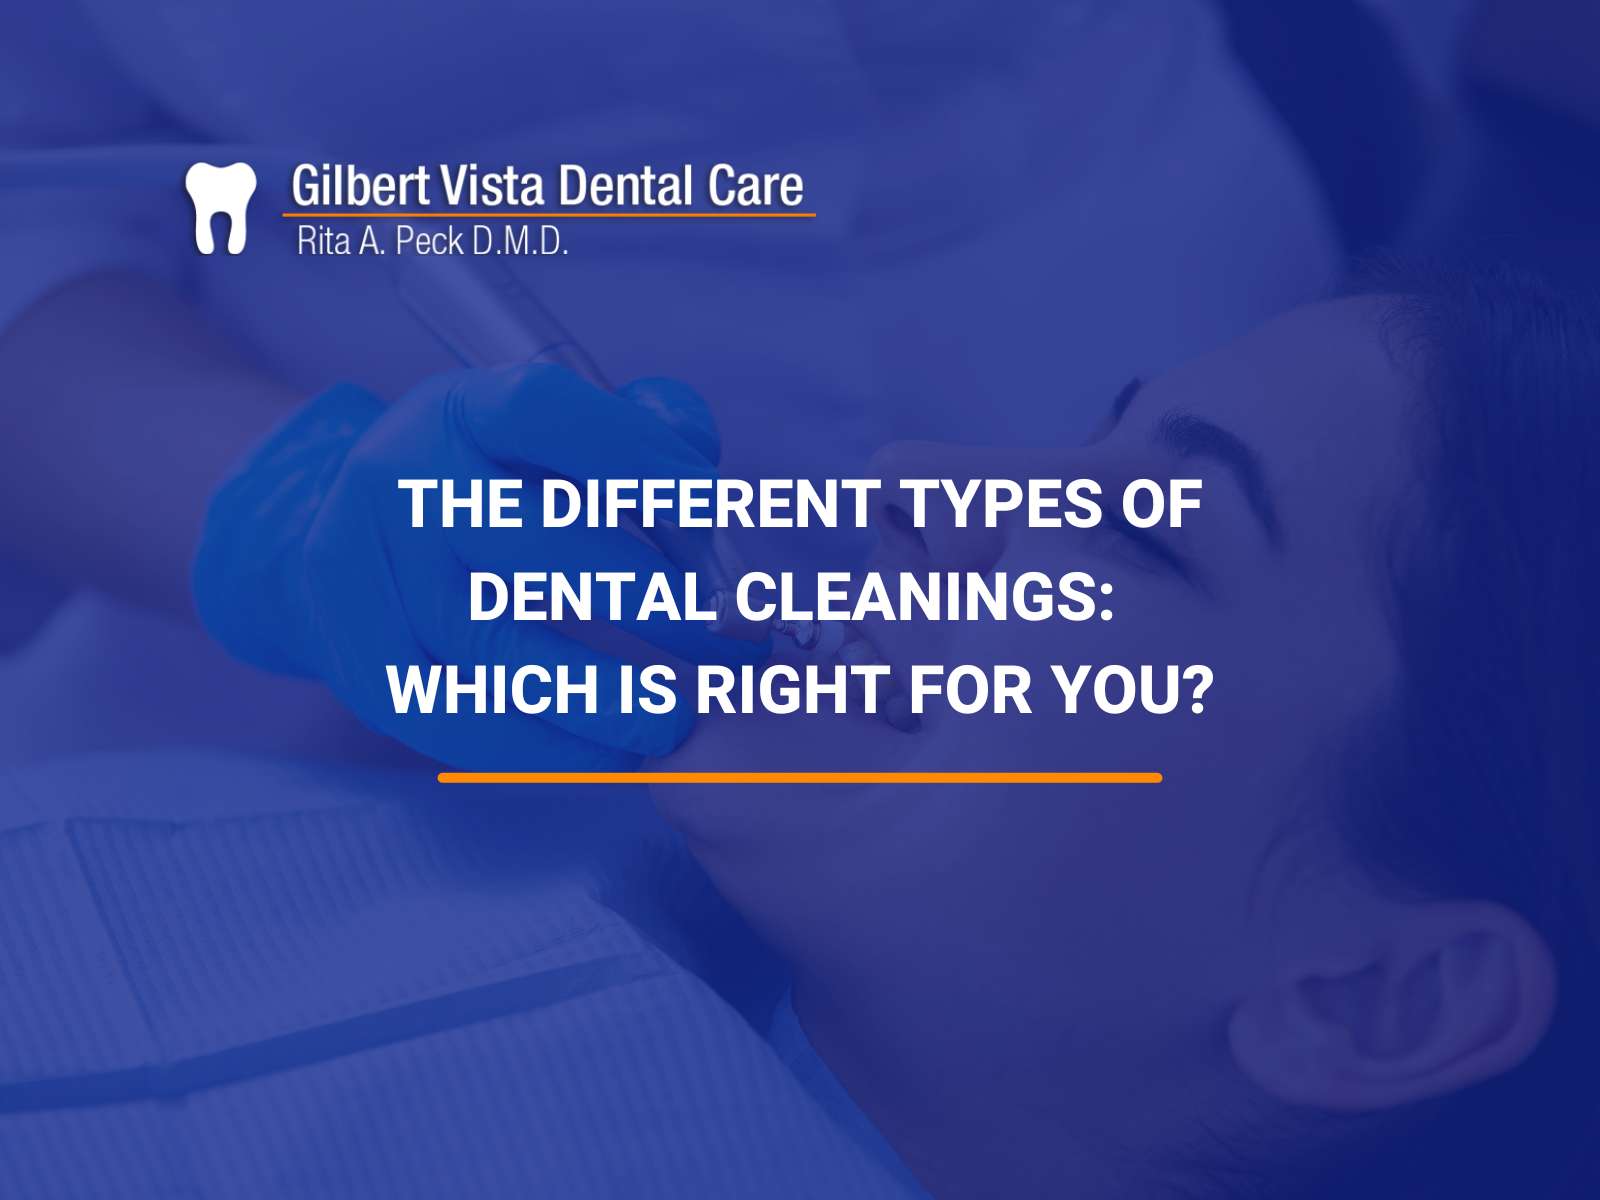 Which Type of Dental Cleanings Is The Right One For You